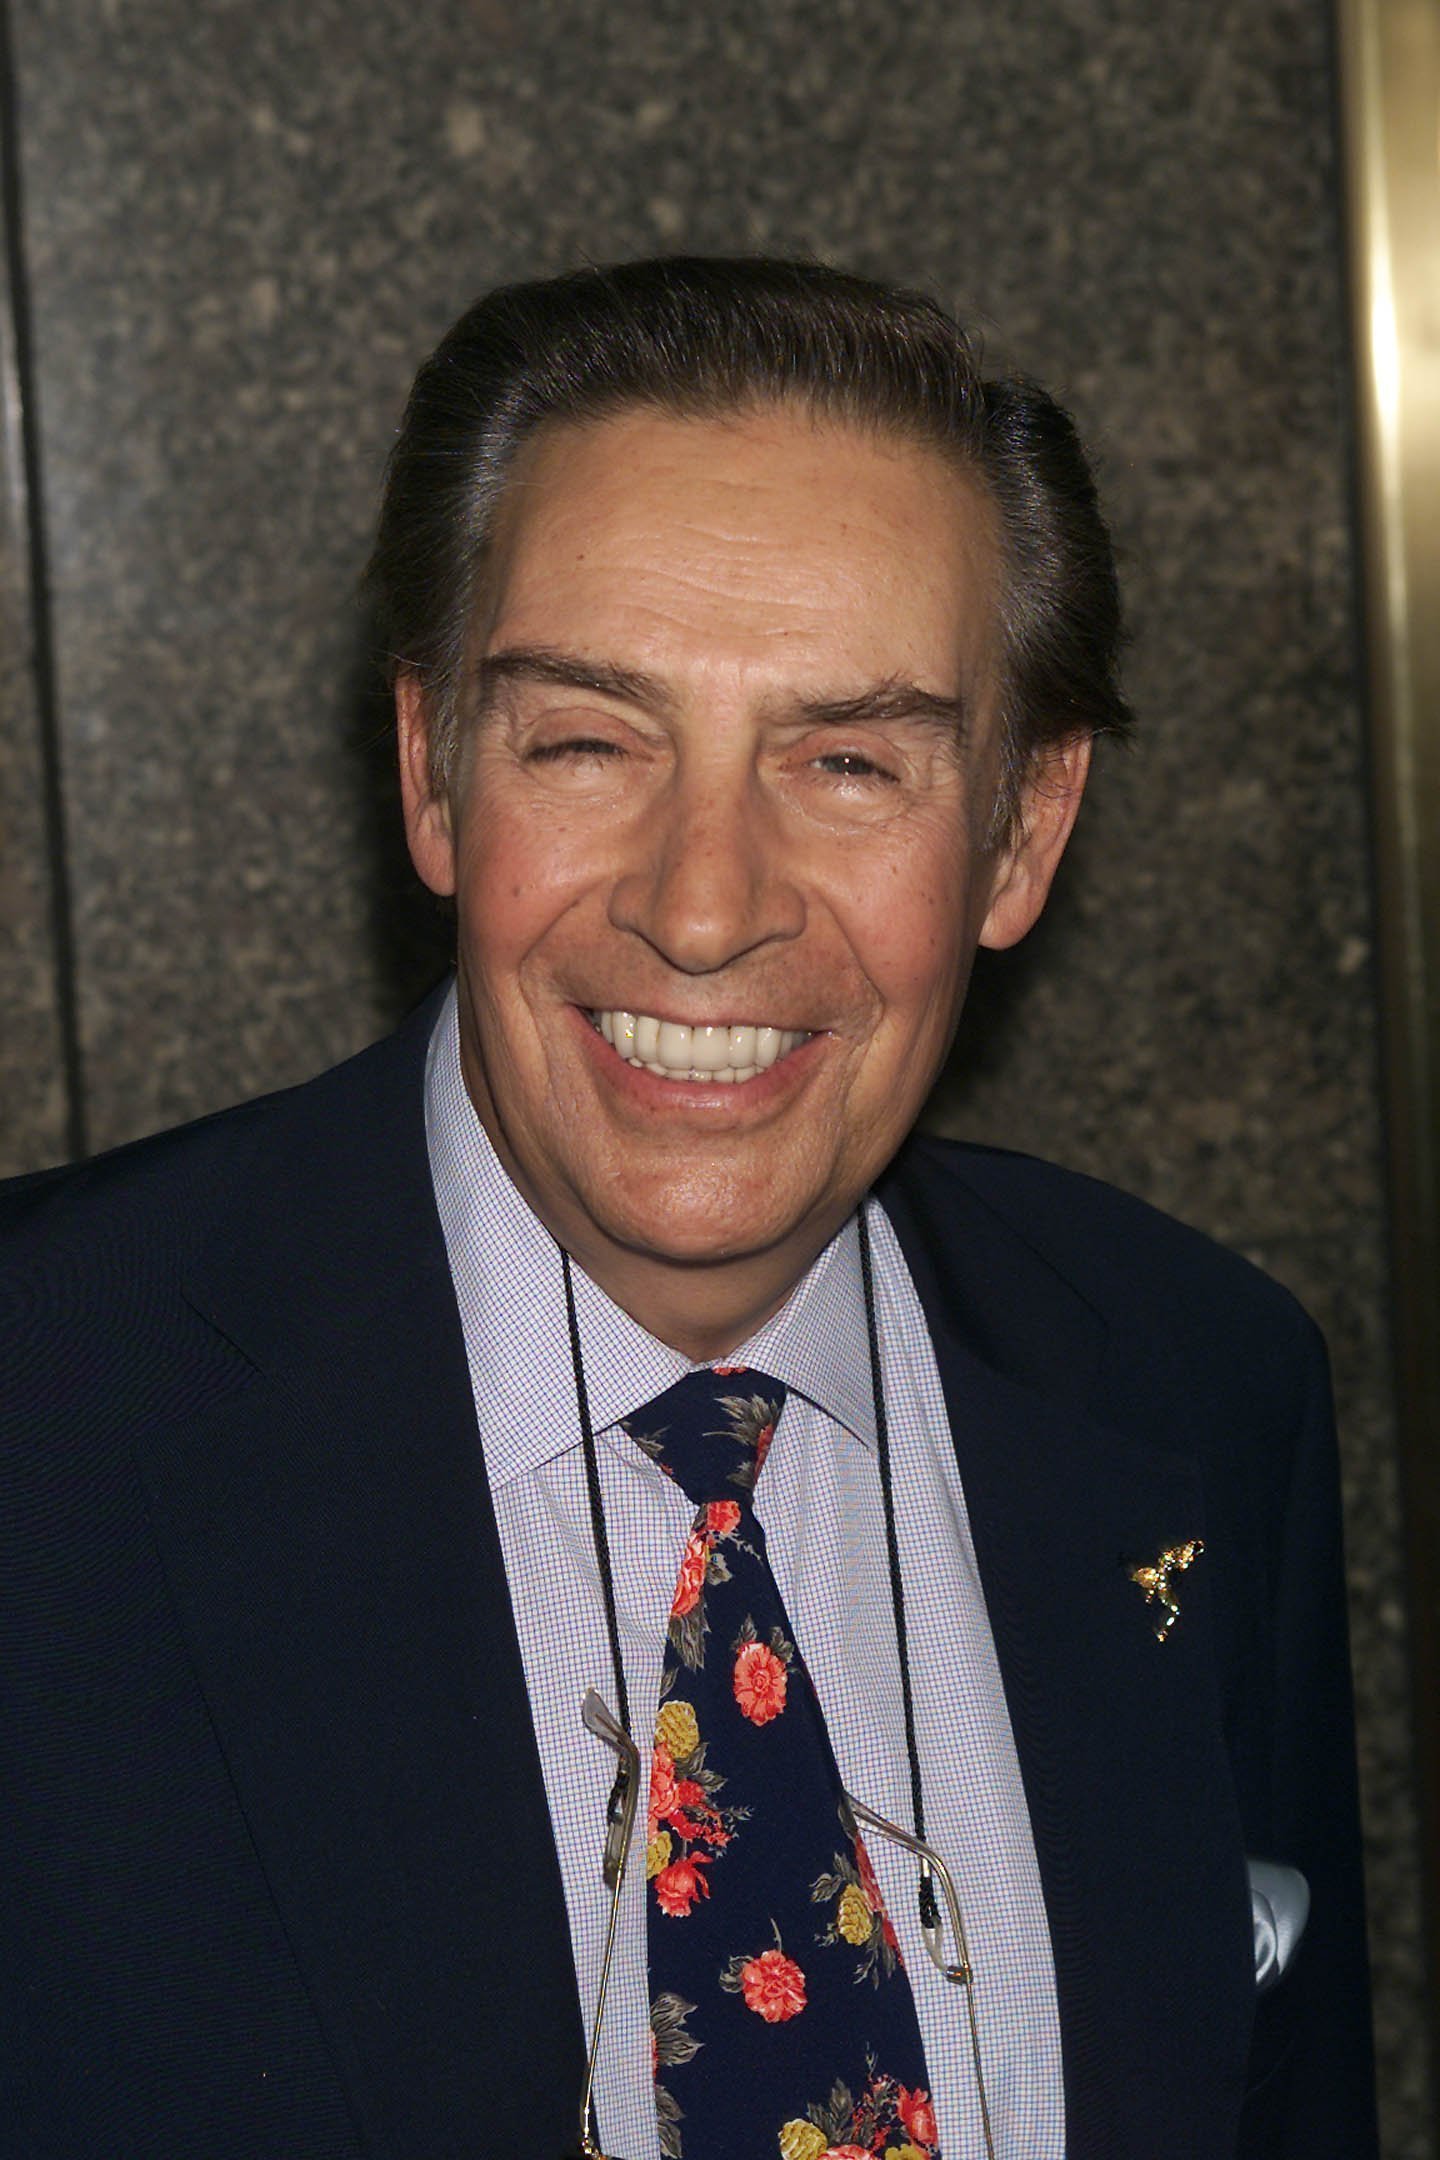 Jerry Orbach during the NBC upfront at Radio City Music Hall in New York City, May 14, 2001. | Source: Getty Images